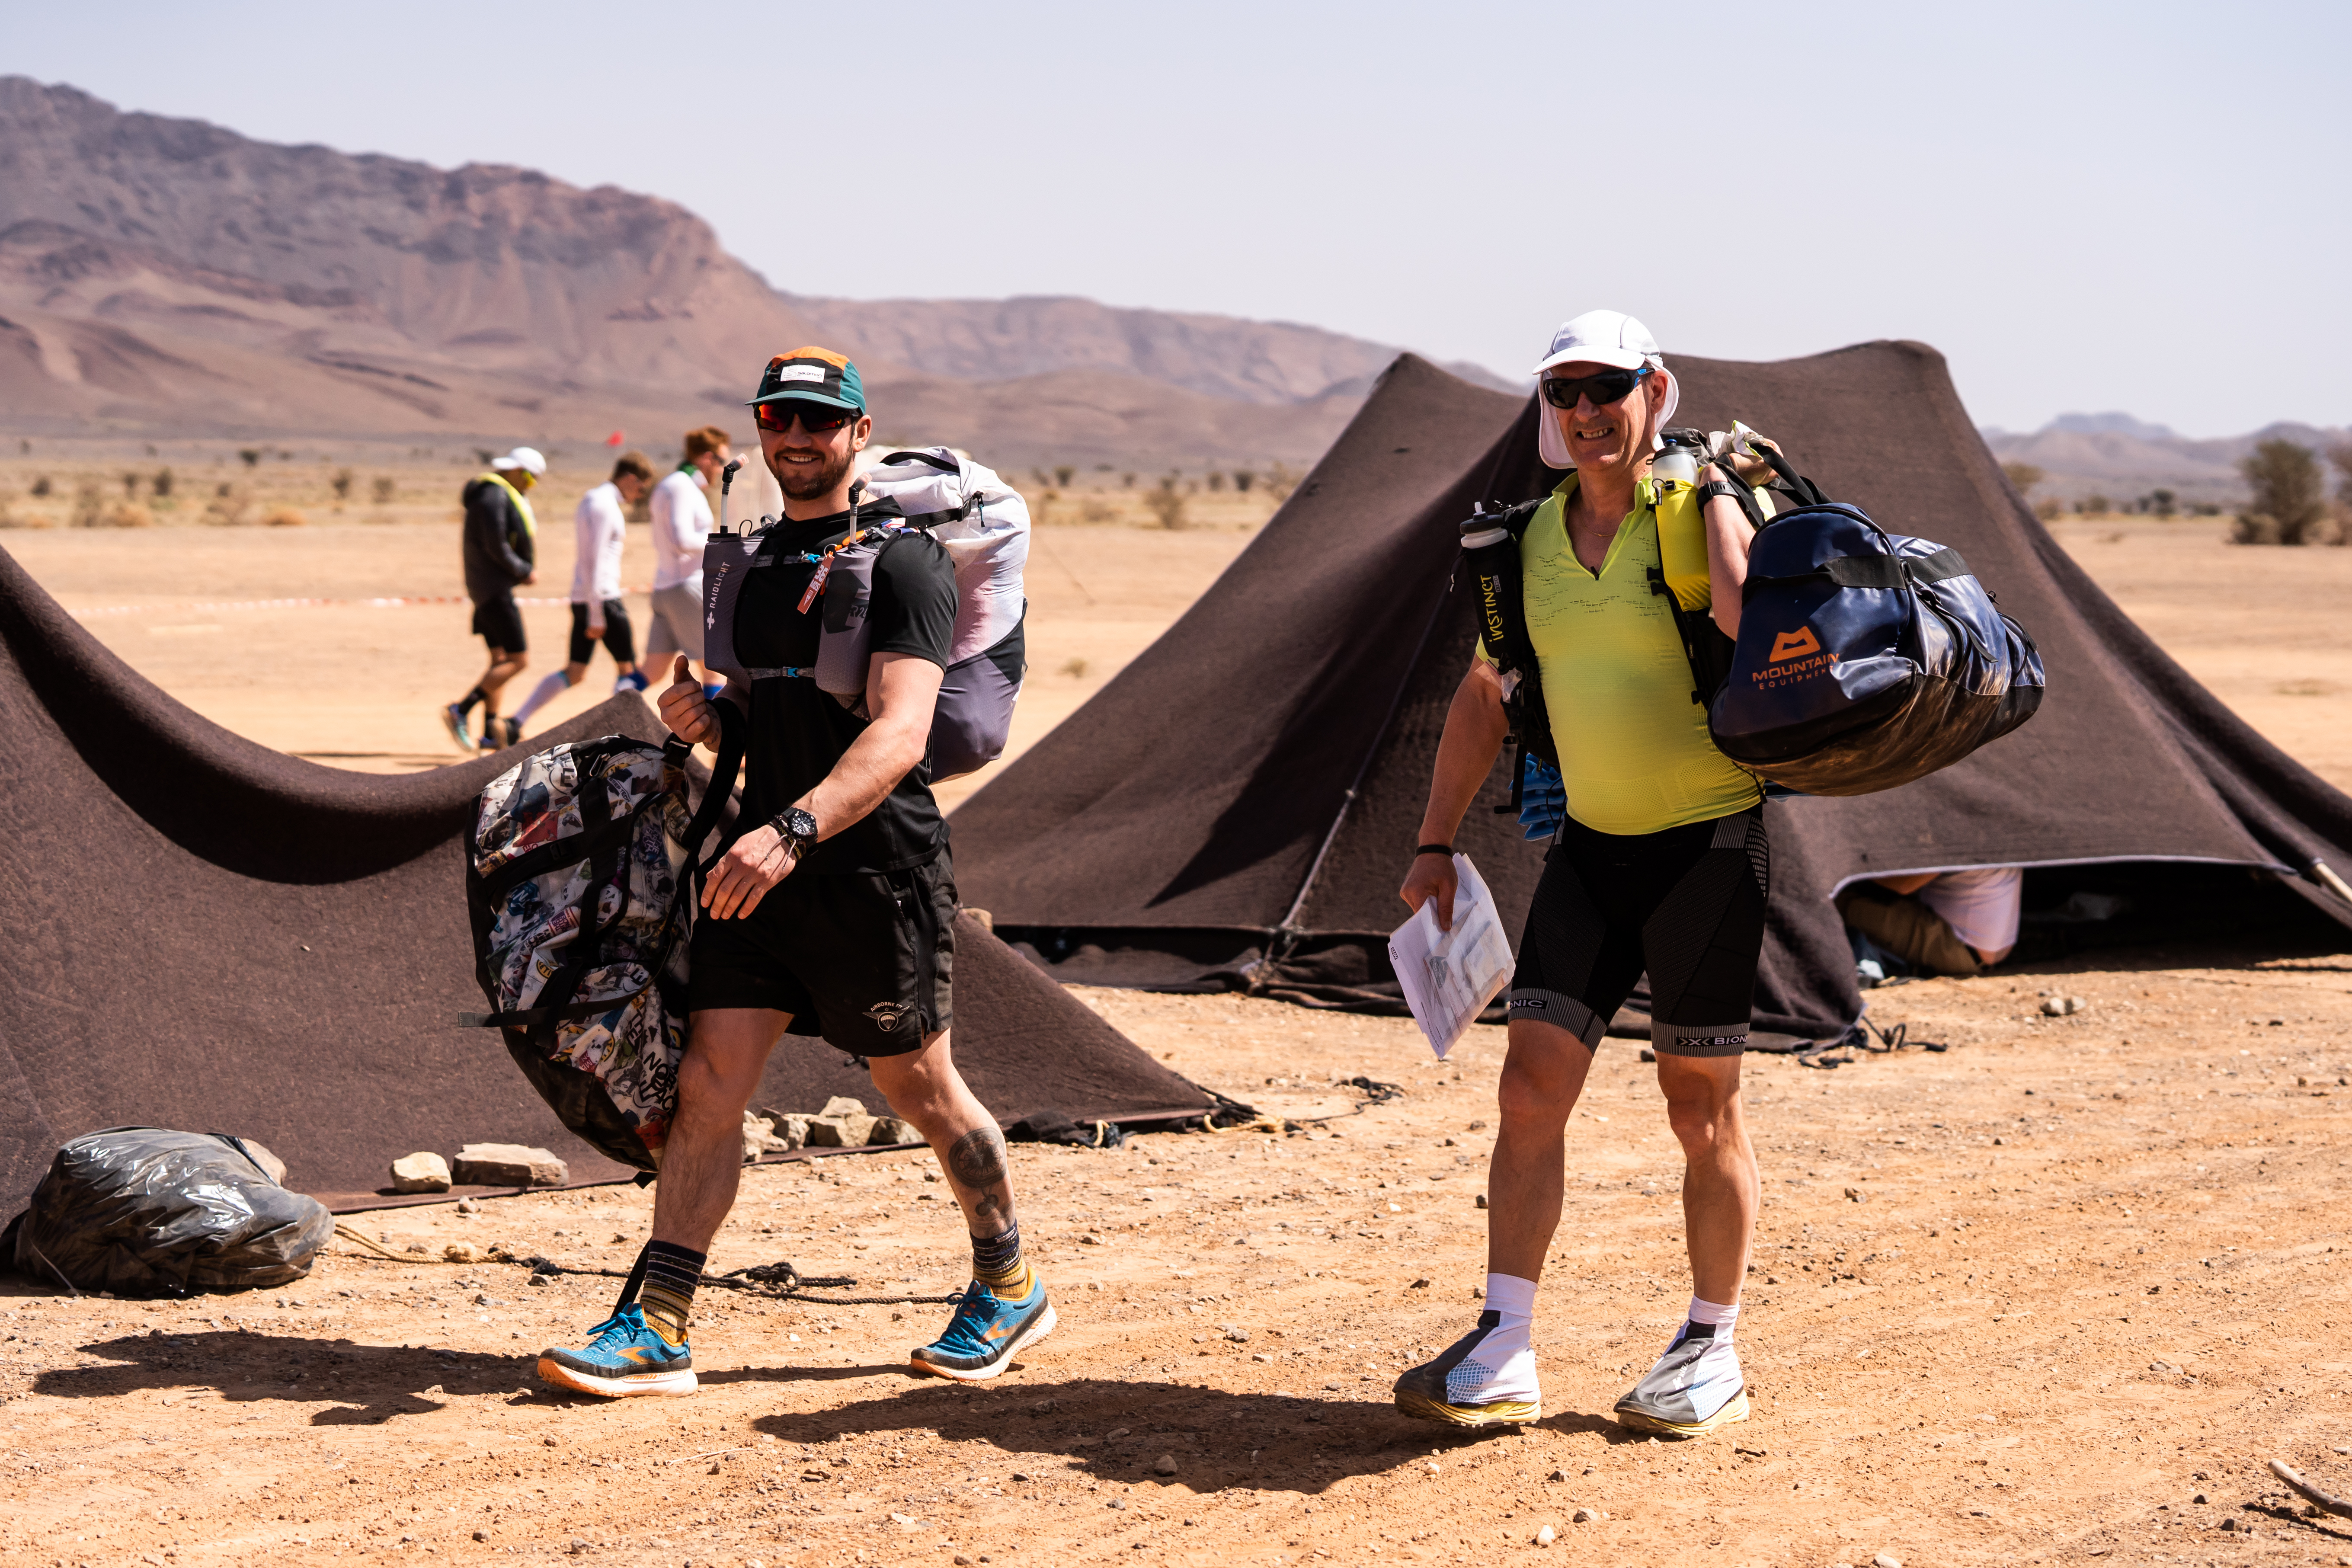 Marathon des Sables. Dropping off the bags before the start of the race, not to be seen again for 7 days